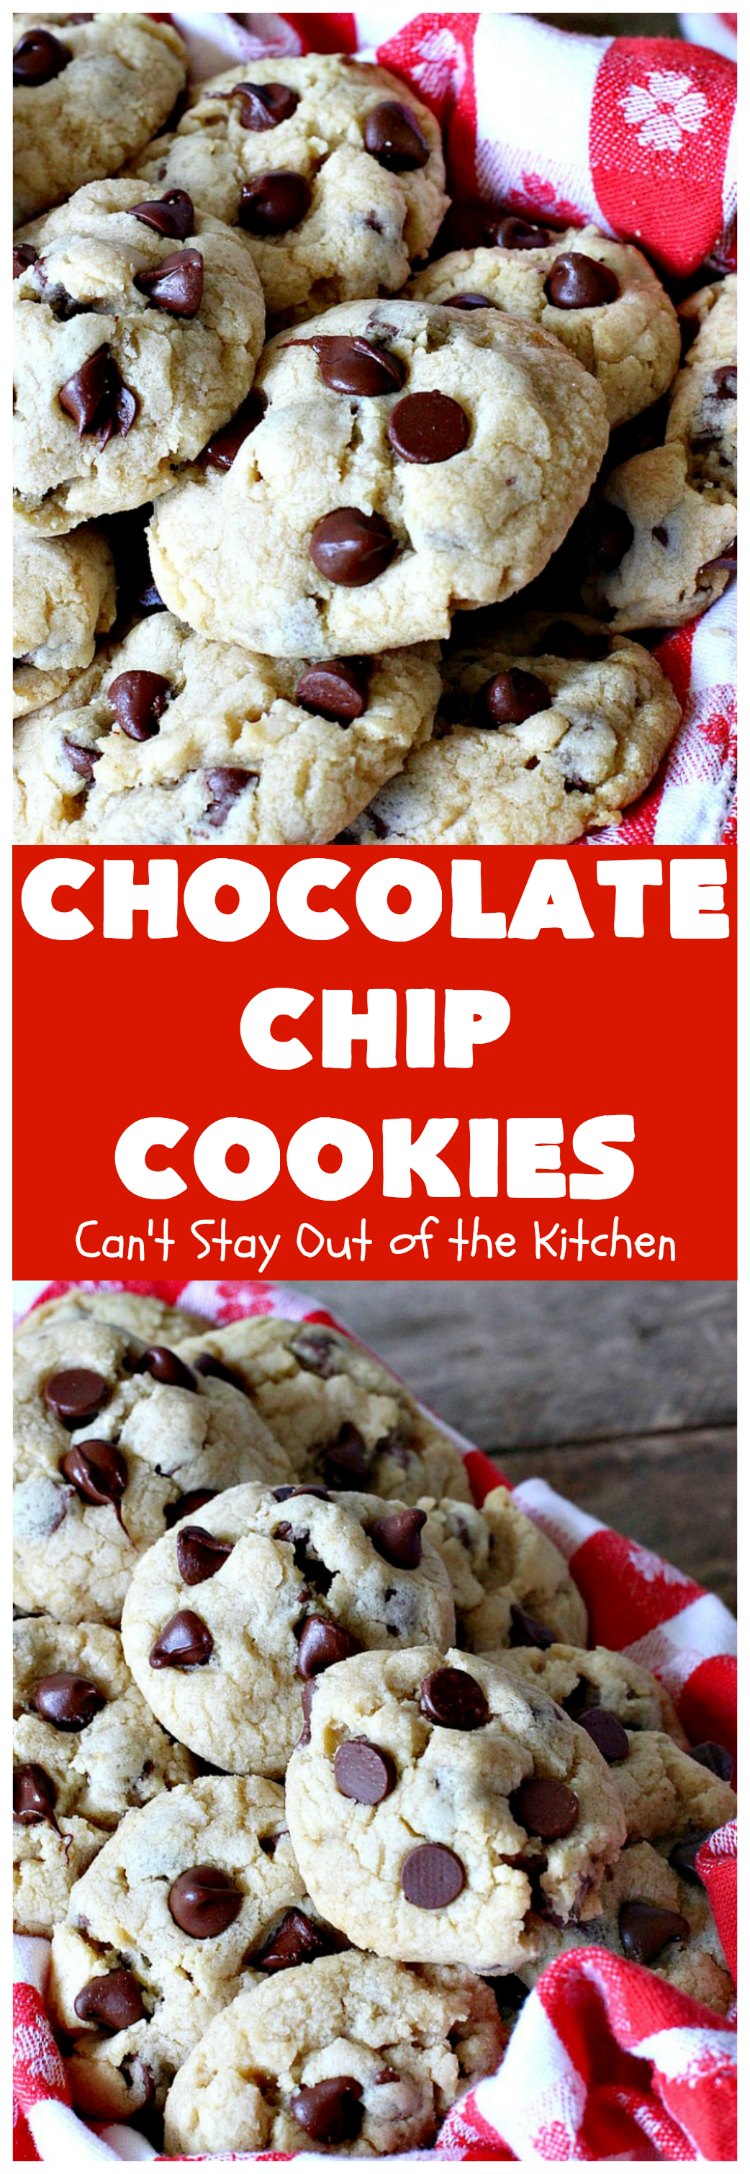 Chocolate Chip Cookies | Can't Stay Out of the KitchenChocolate Chip Cookies | Can't Stay Out of the Kitchen